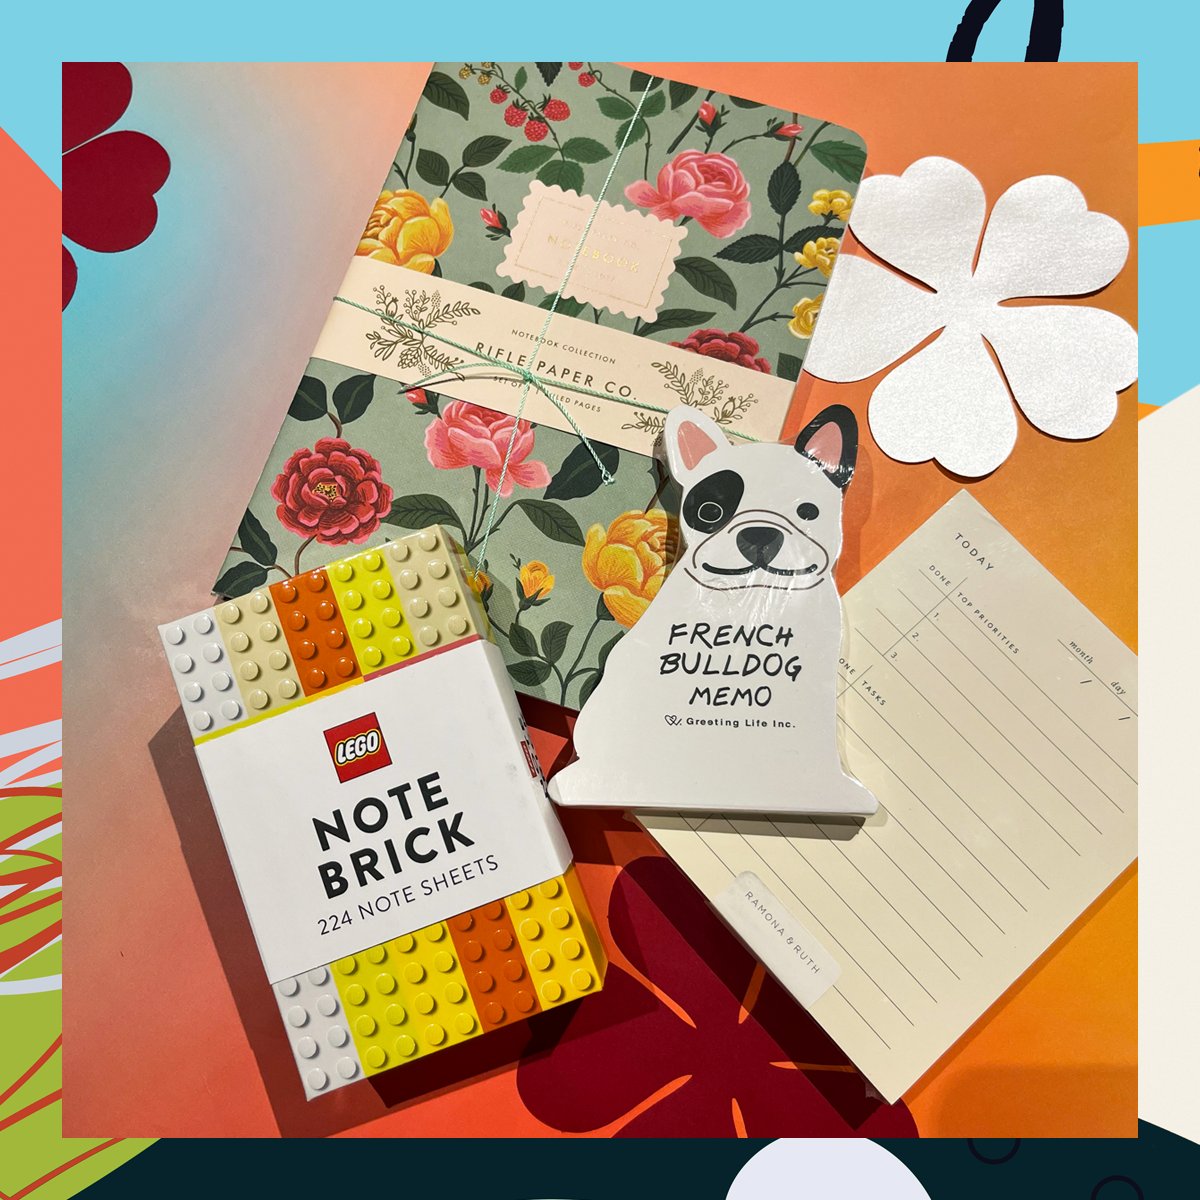 Remind me to... National Memo Day is today! Paper Source has everything you need to keep your notes looking professional and stylish. #thebayshorelife #NationalMemoDay #papersource